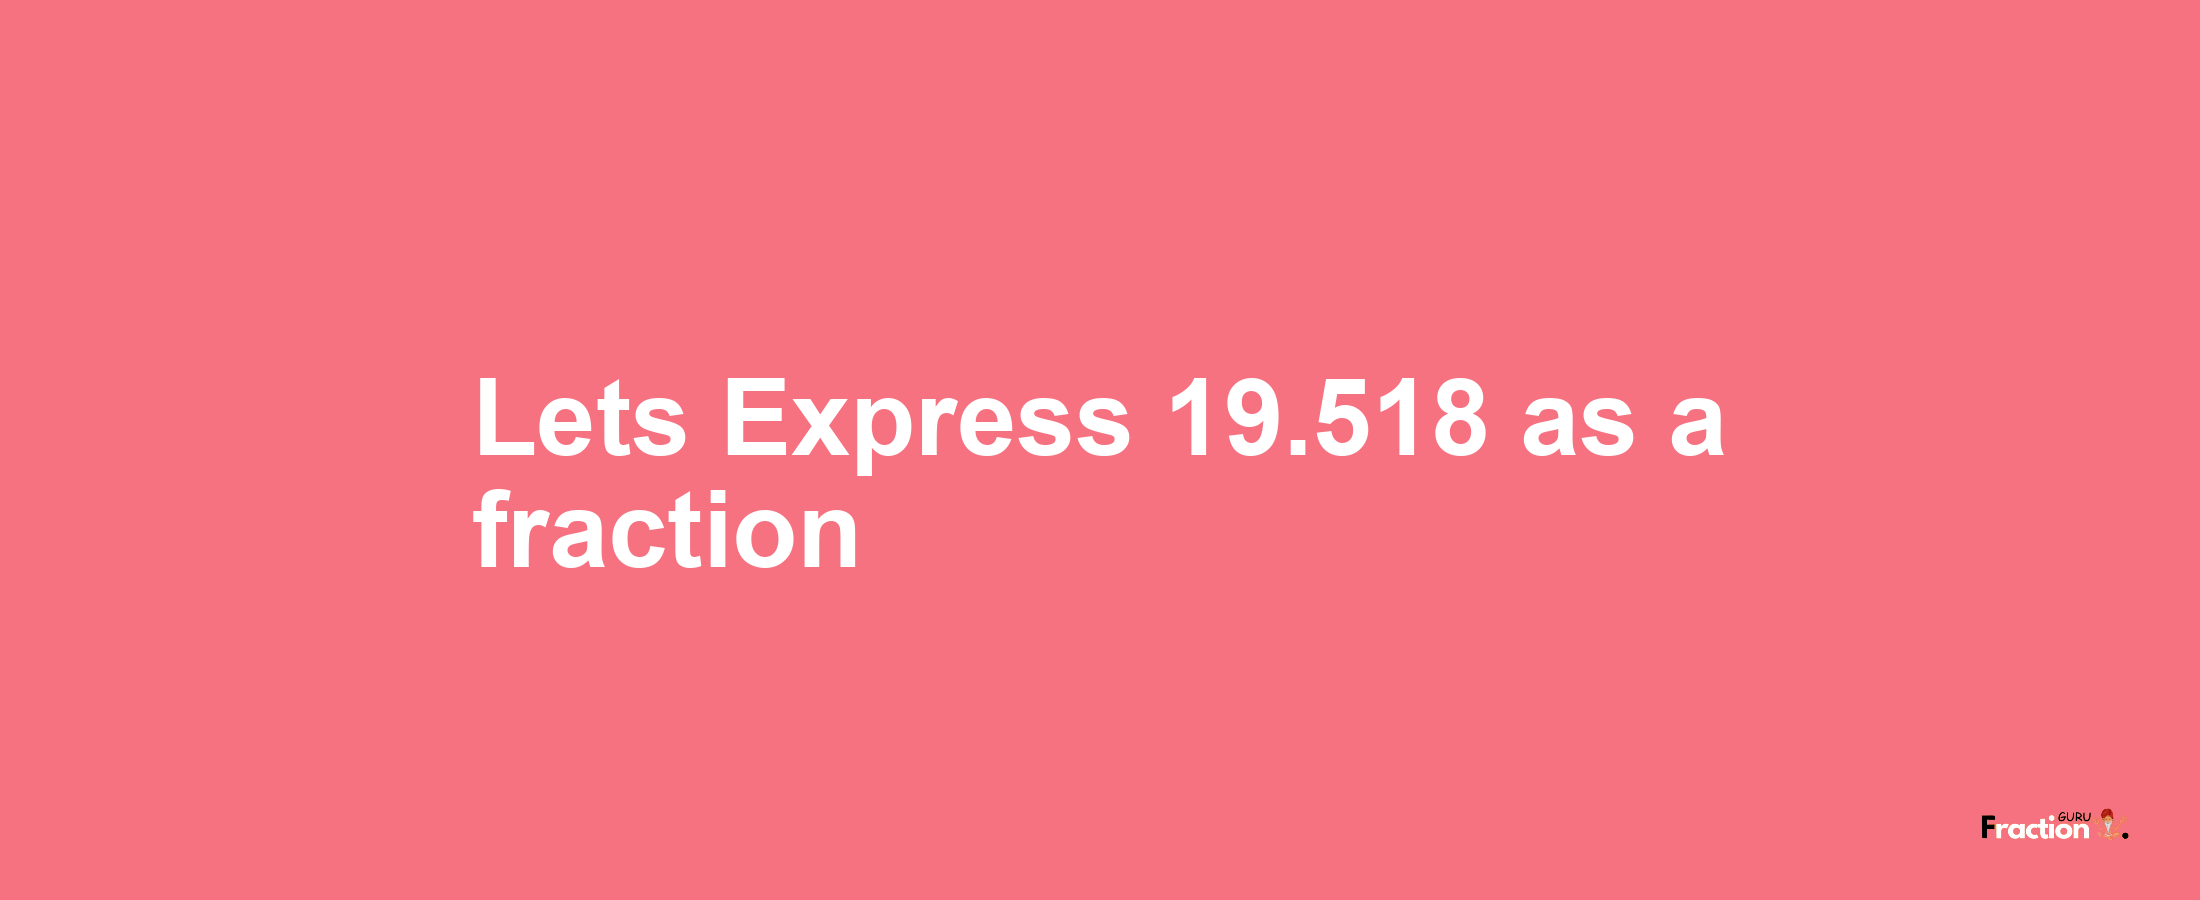 Lets Express 19.518 as afraction